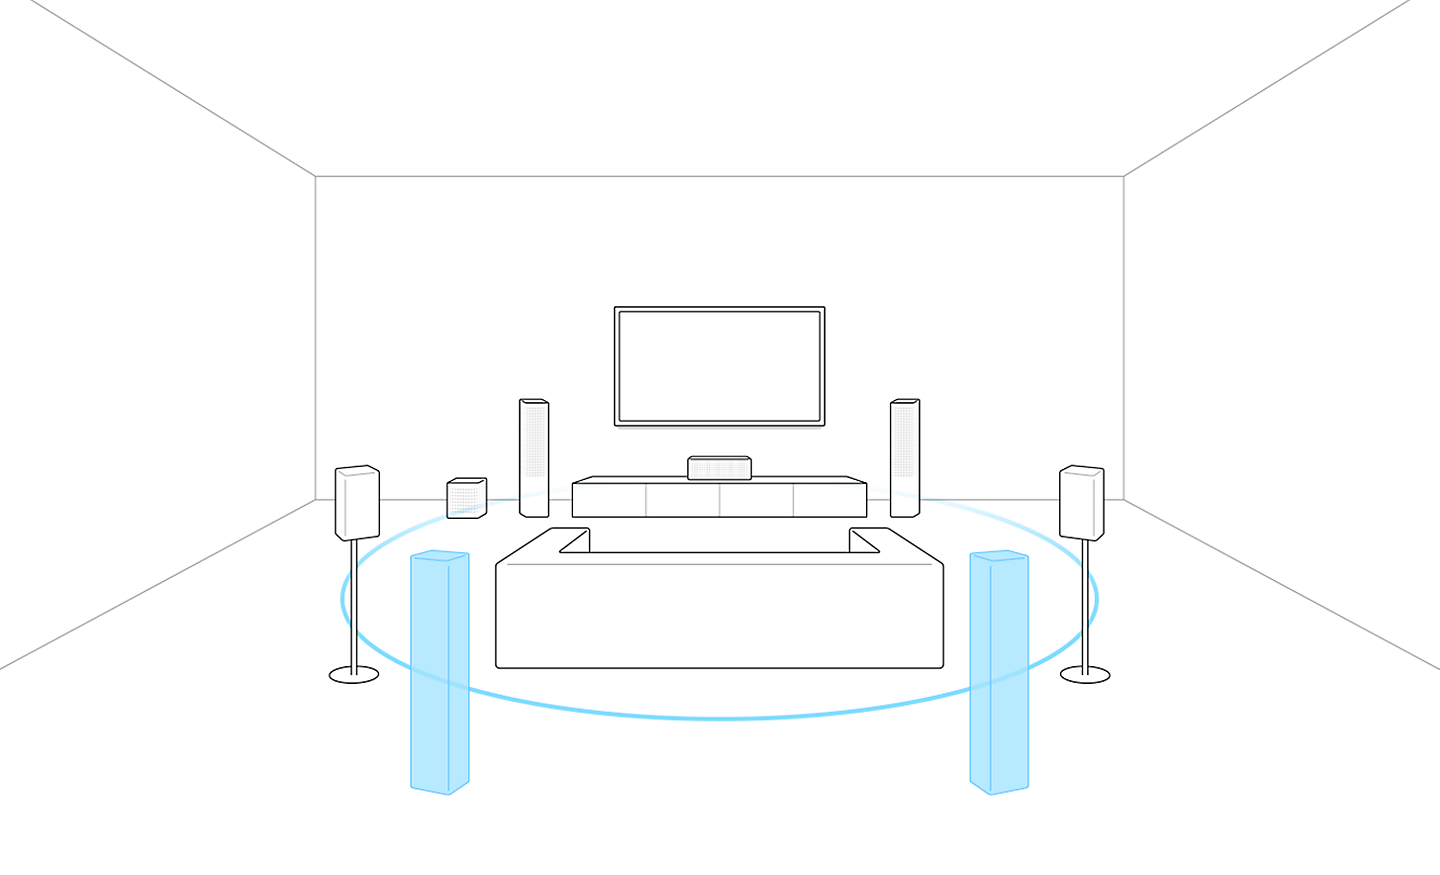 Outline image of a TV with sofa and speakers. Blue versions of two speakers sit behind the sofa